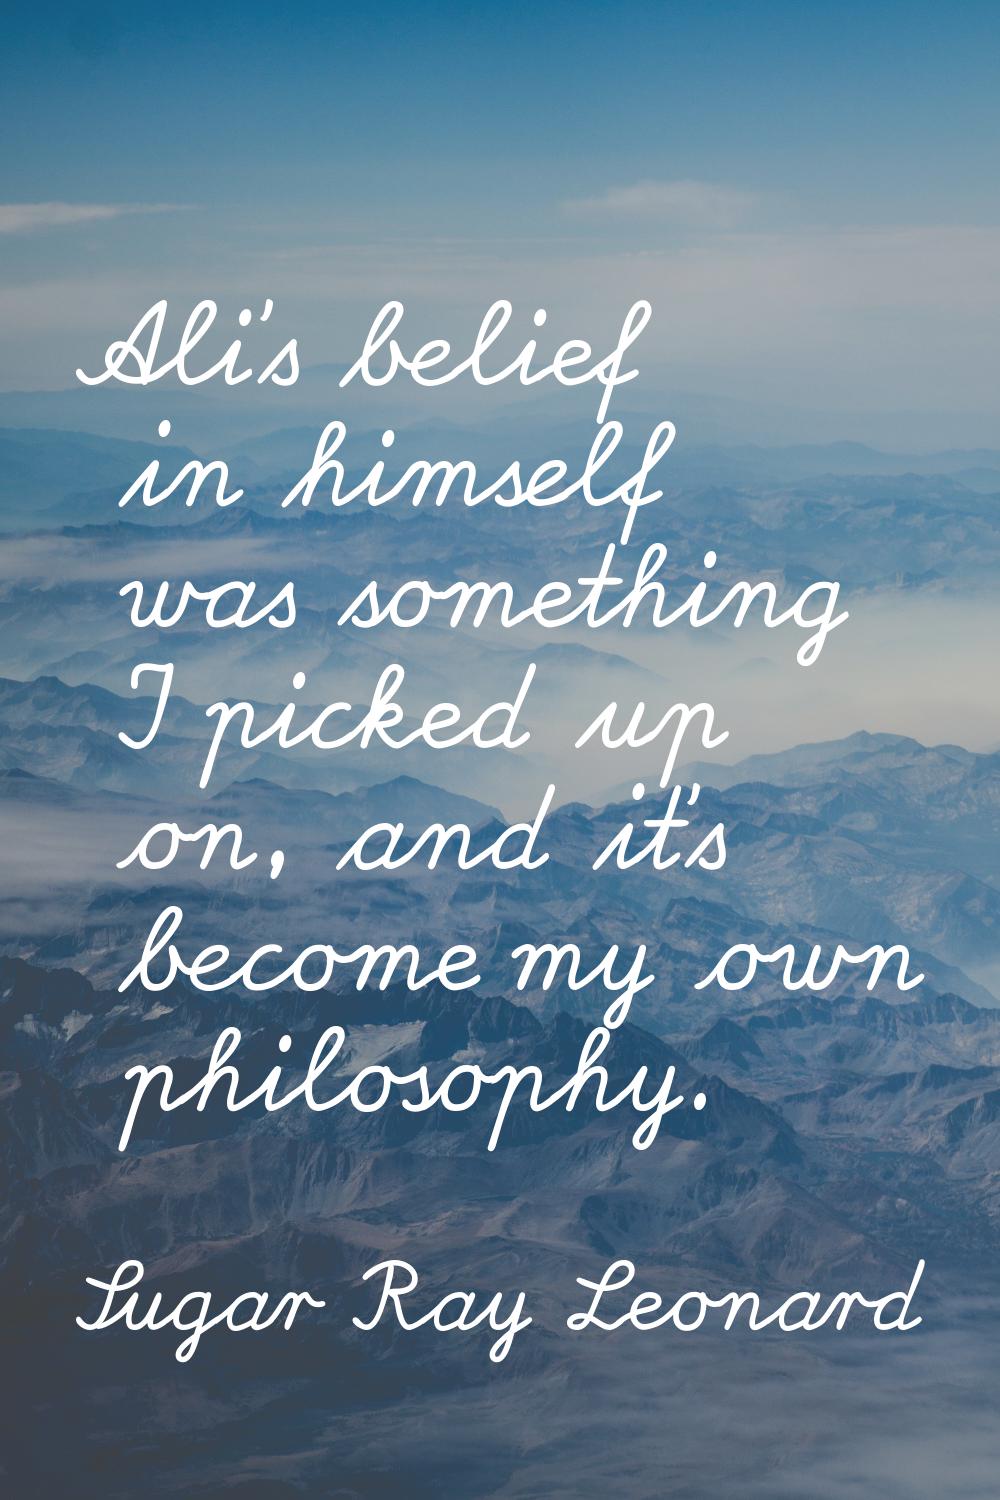 Ali's belief in himself was something I picked up on, and it's become my own philosophy.